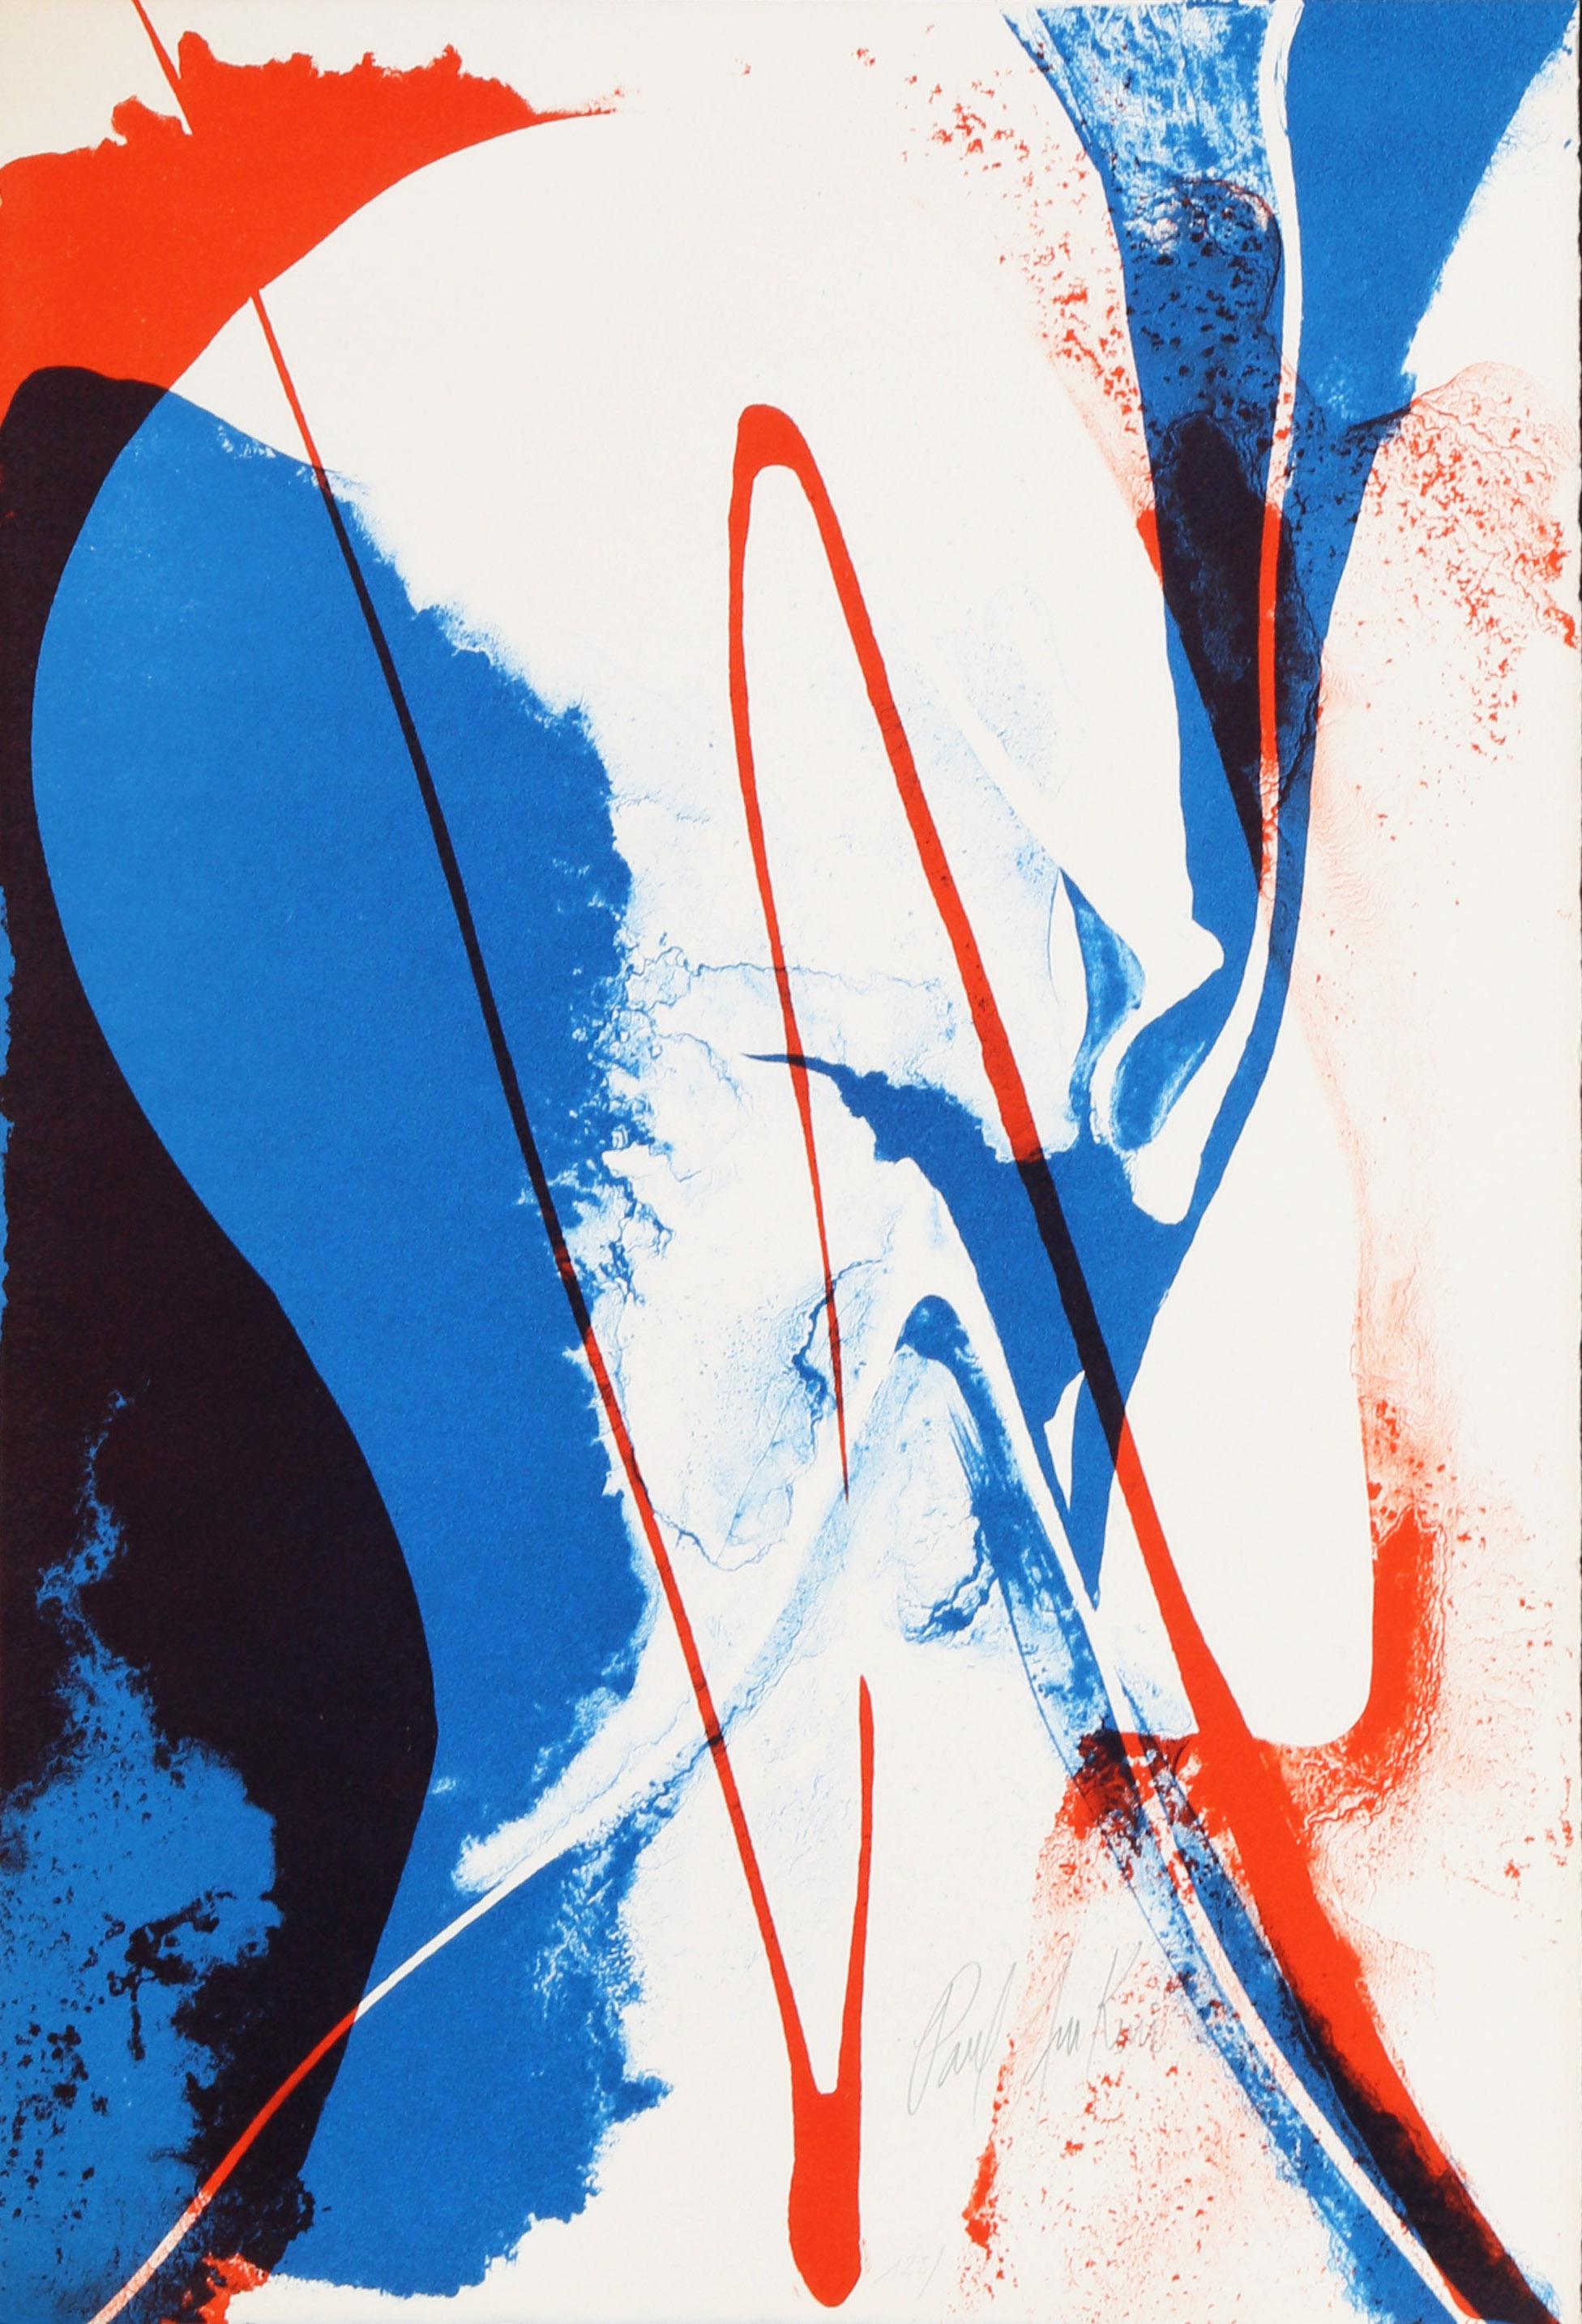 A lithograph from the portfolio "Seeing Voices", a collection that also includes several poems. This abstract piece by Paul Jenkins is signed and numbered on the front of the print in pencil.

Seeing Voices 3
Paul Jenkins, American